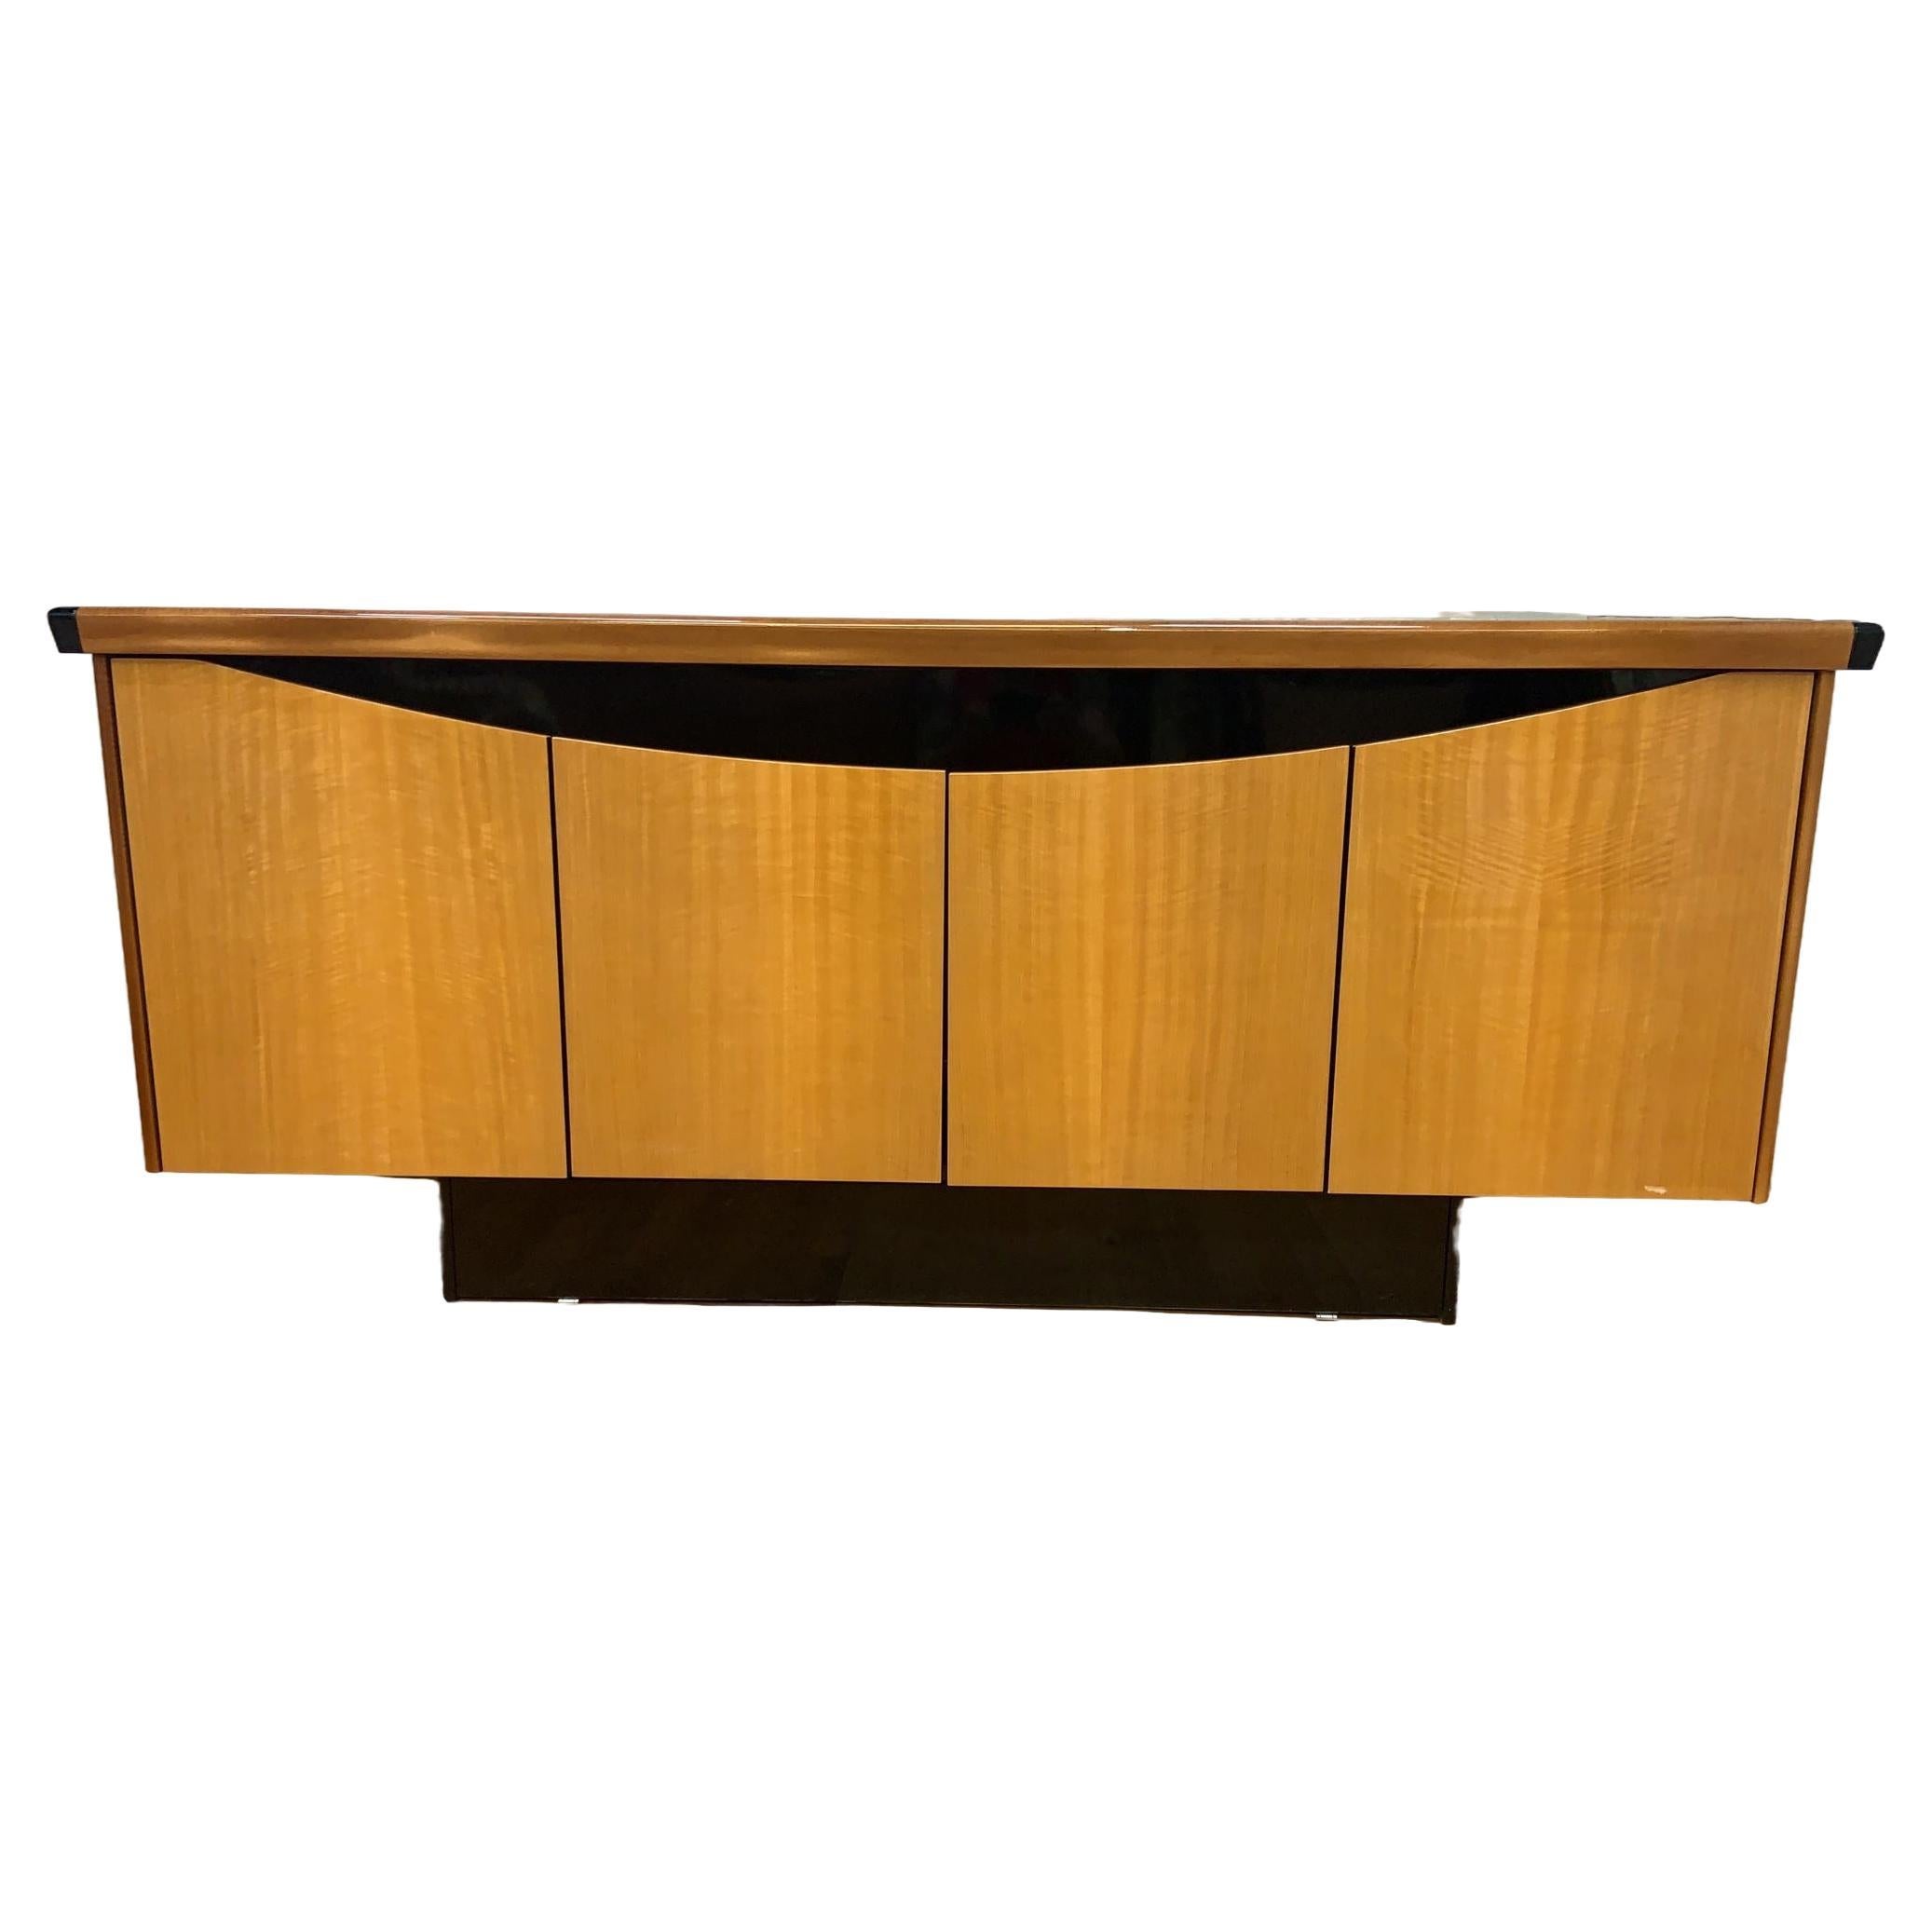 Vintage Italian Art Deco Birdseye Maple and Satinwood Black Lacquered Sideboard For Sale